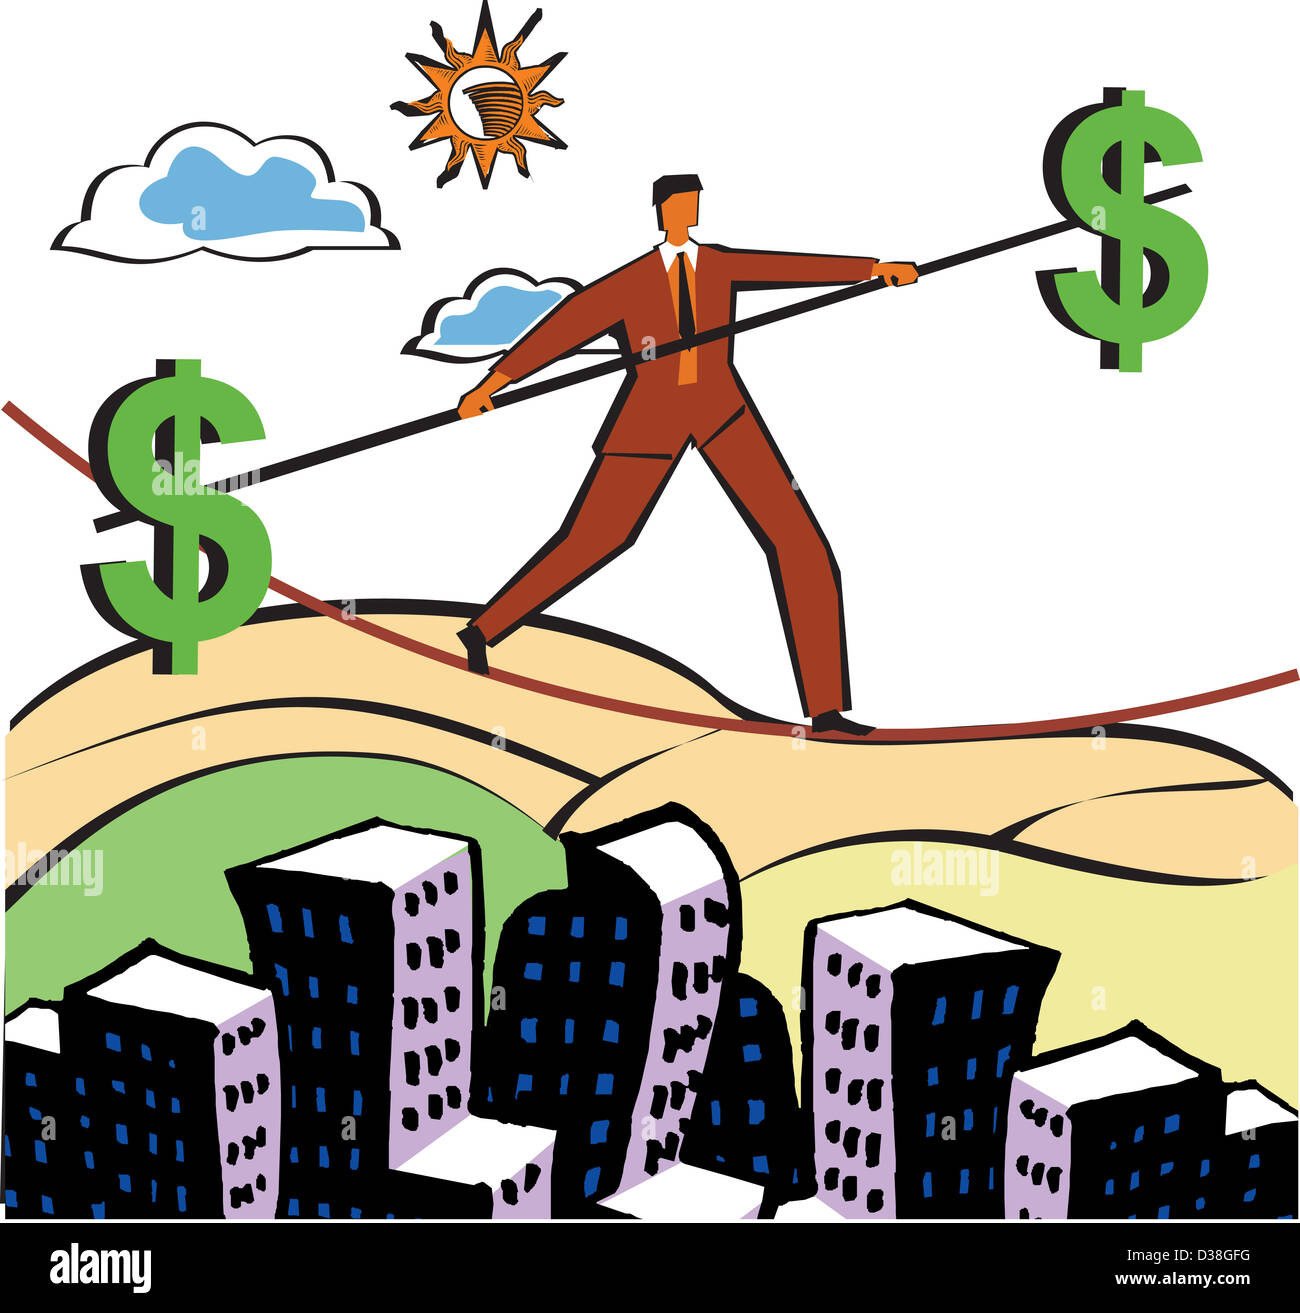 Businessman walking on a tightrope with a pole with dollar signs on ends Stock Photo